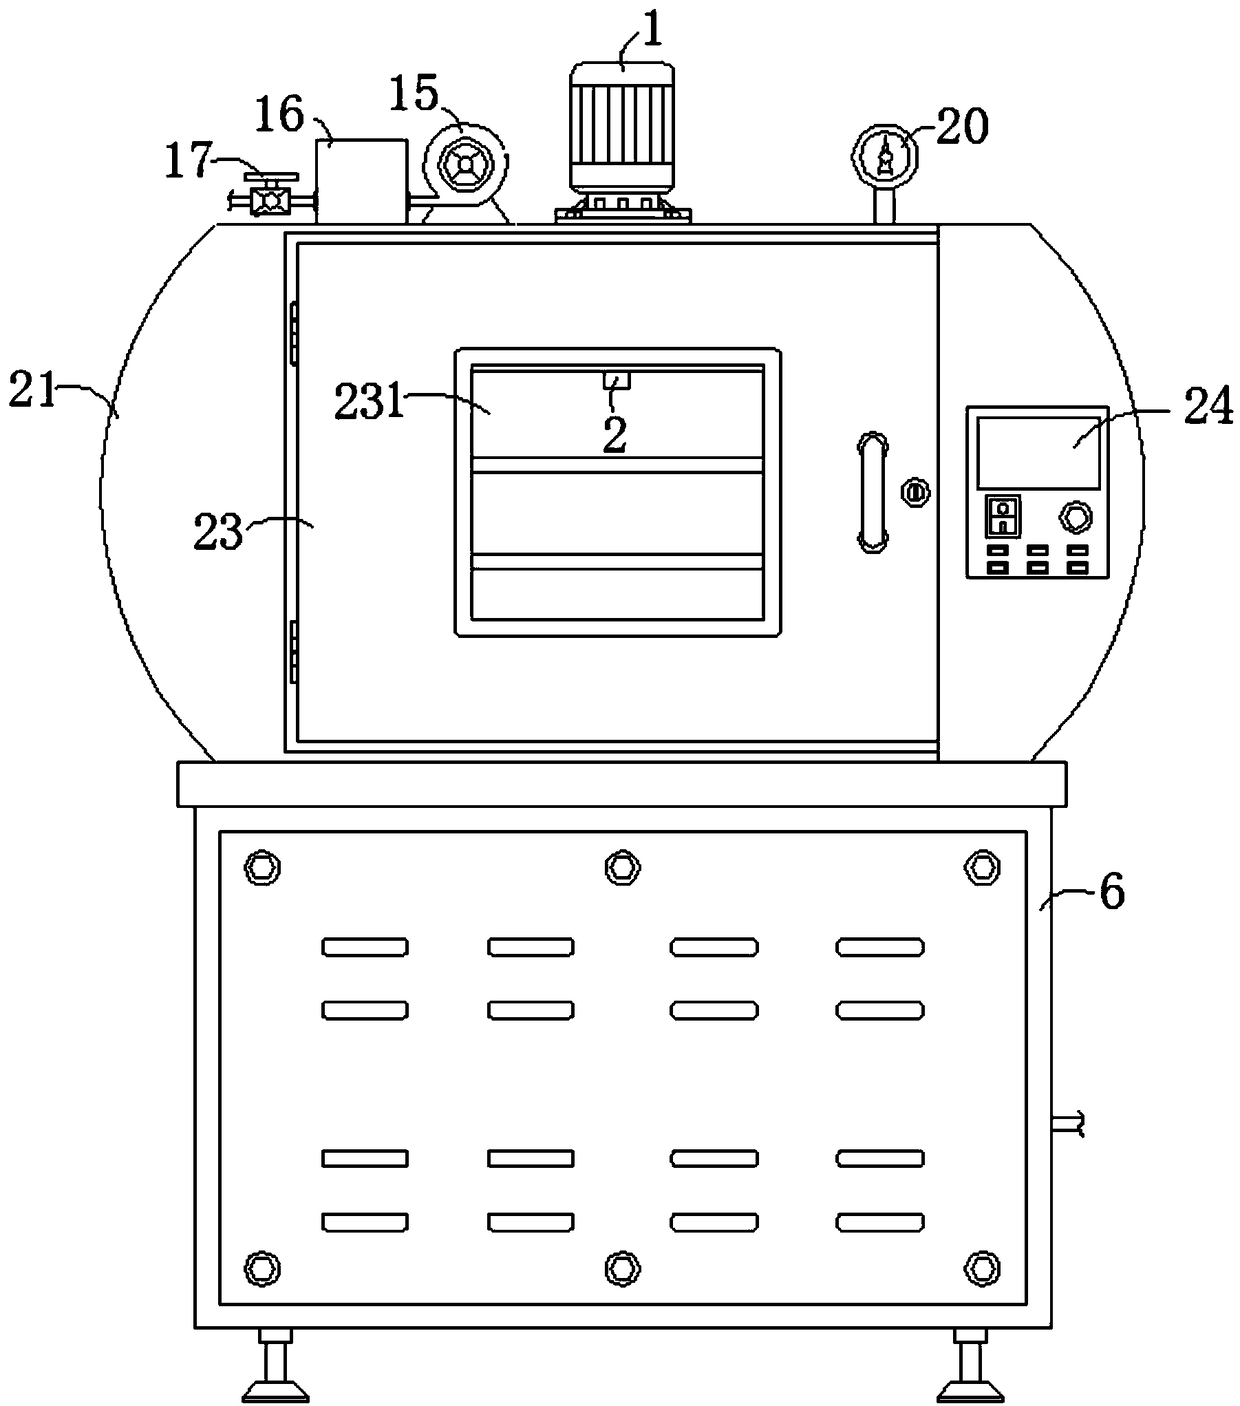 Clothes sterilizing and incensing device